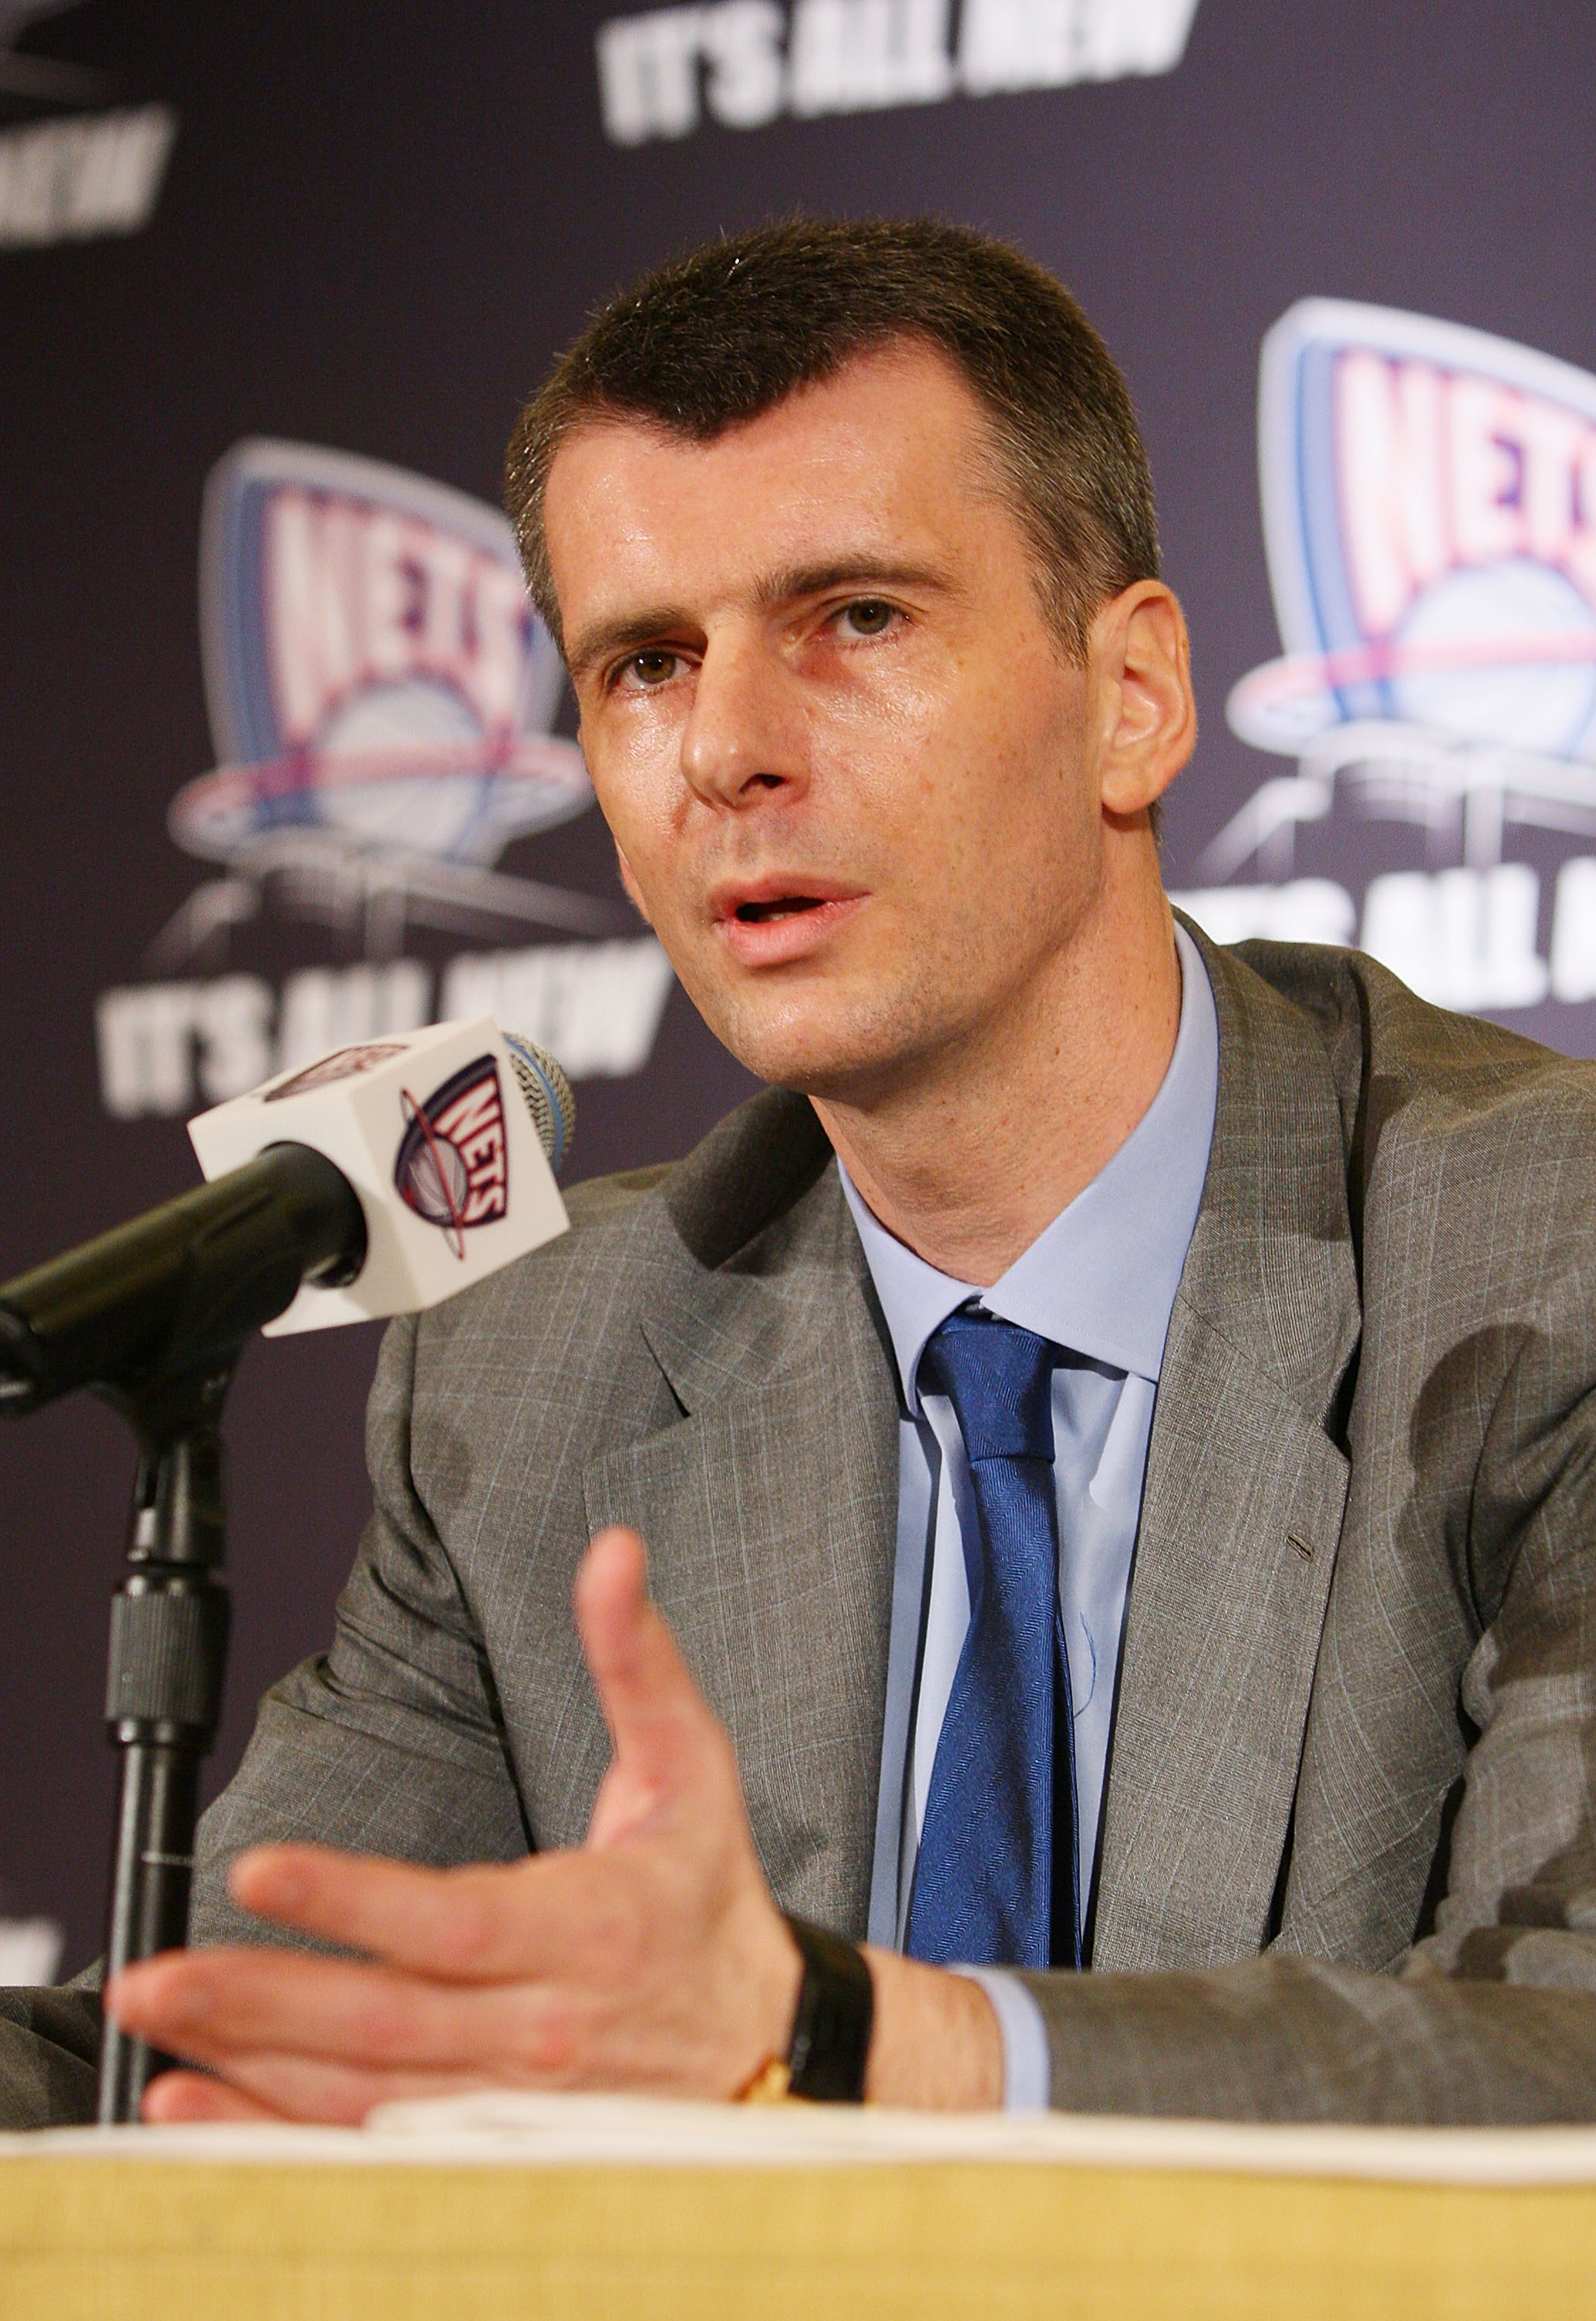 NEW YORK - MAY 19:  New Jersey Nets Owner Mikhail Prokhorov addresses the media during a press conference at the Four Seasons Hotel on May 19, 2010 in New York City.  (Photo by Mike Stobe/Getty Images)